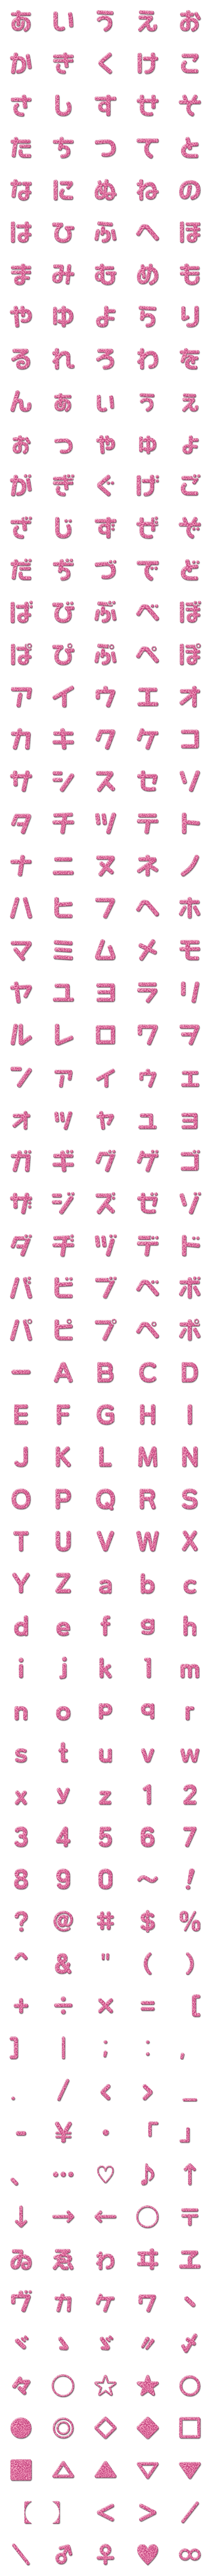 [LINE絵文字]レオパード柄 デコ文字 ピンクの画像一覧